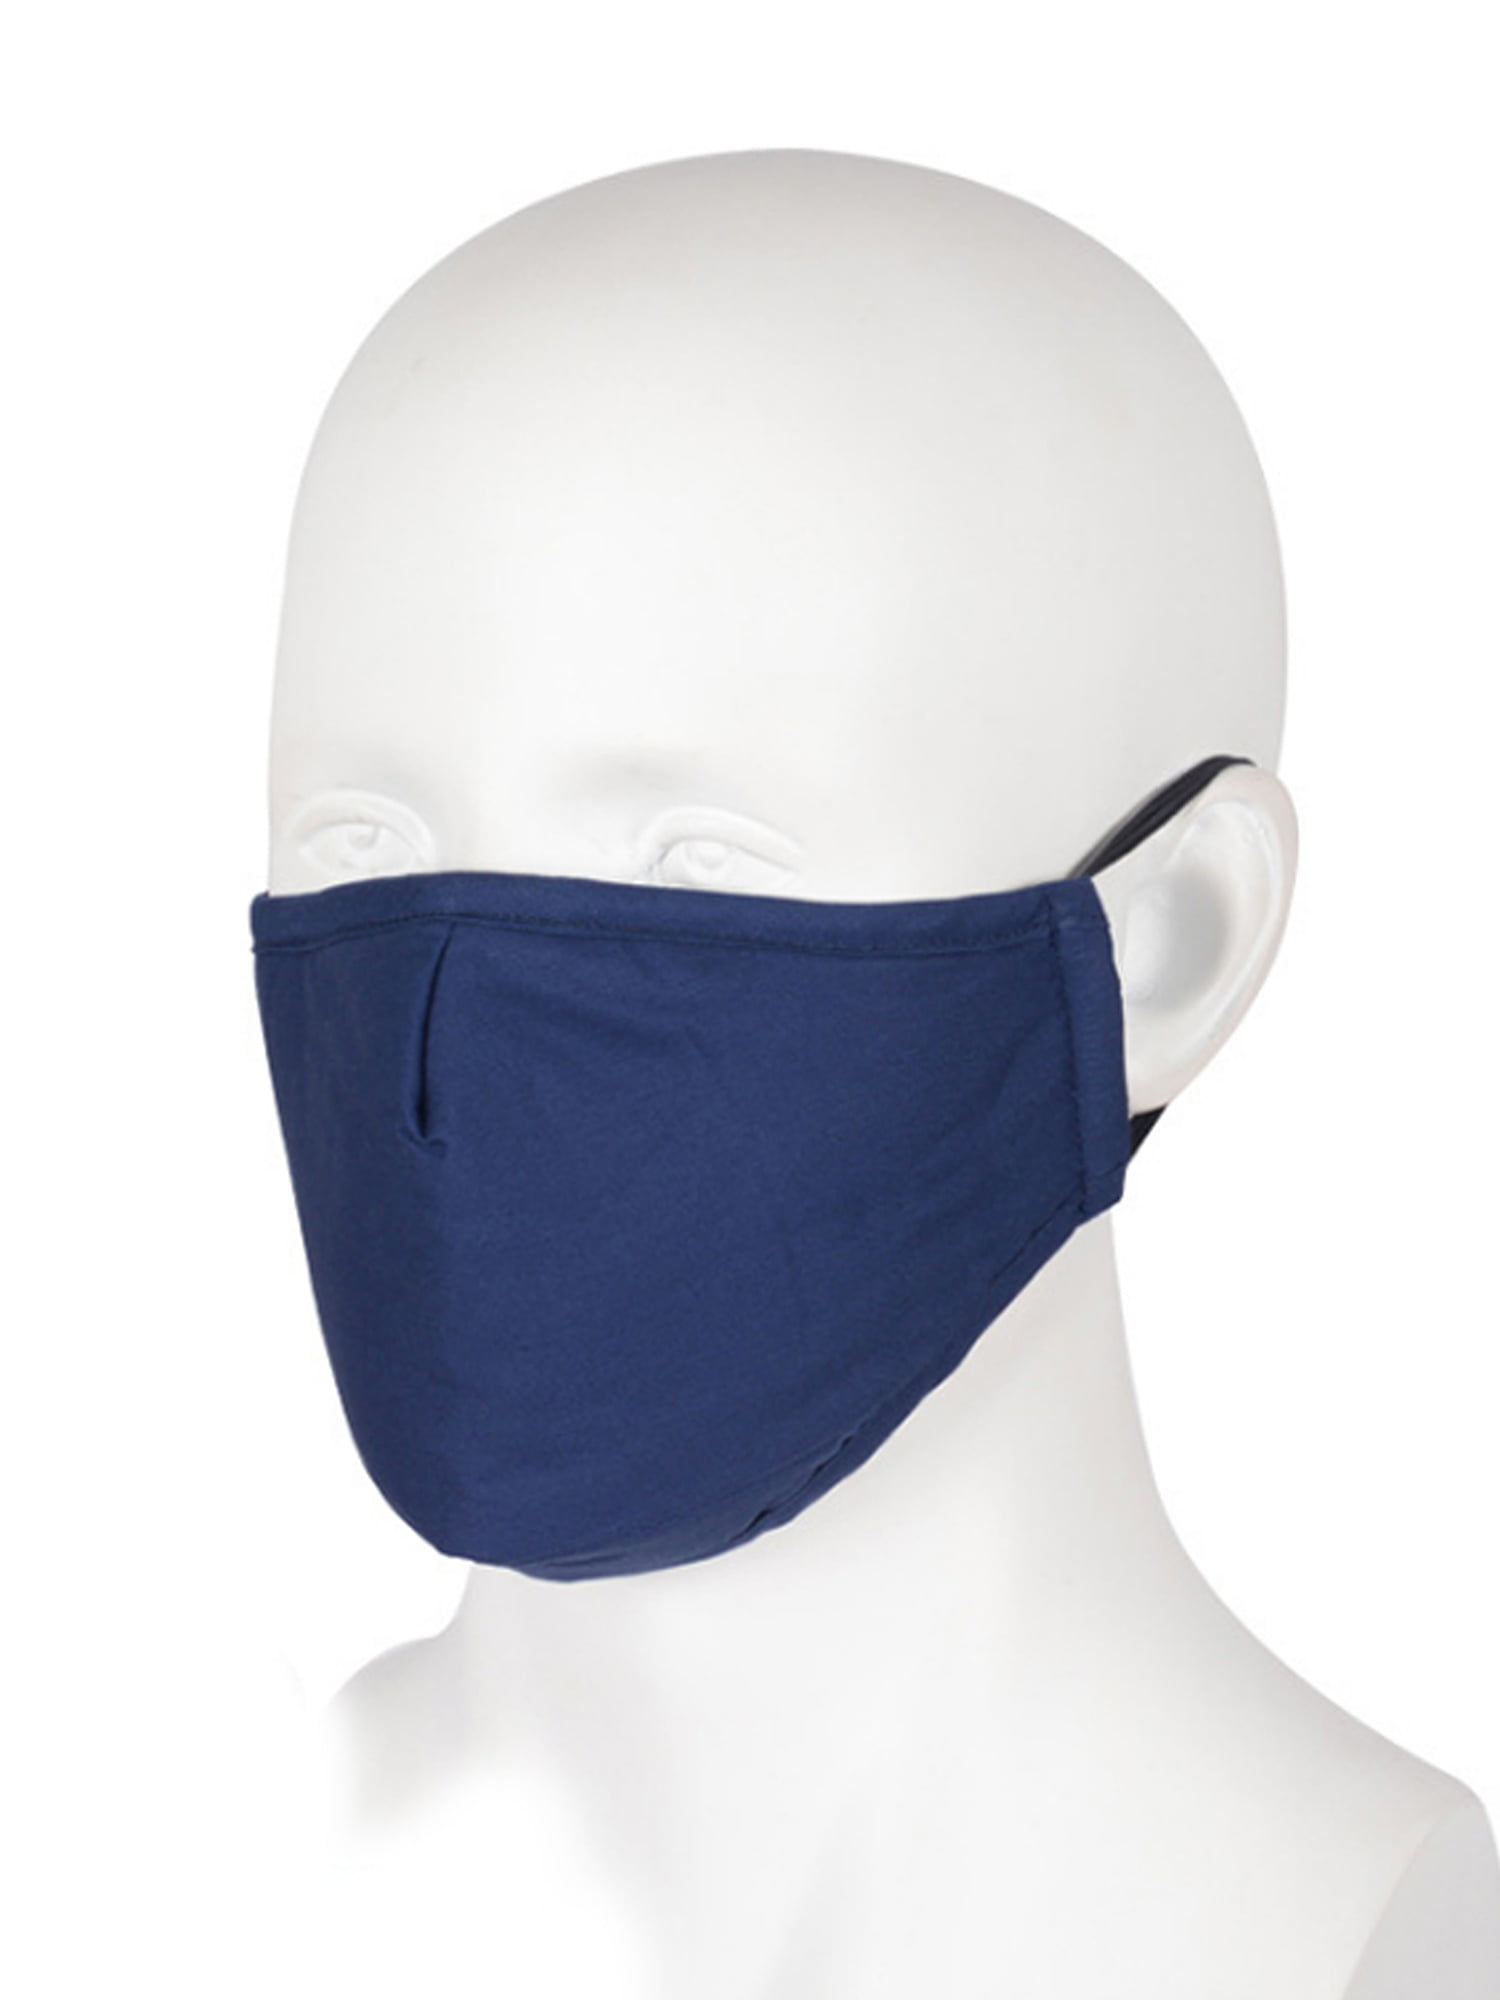 Selfieee Adult Protective Mouth Mask with Filter Safety Anti-Fog Masks for Adult 00035 Navy Blue - Walmart.com